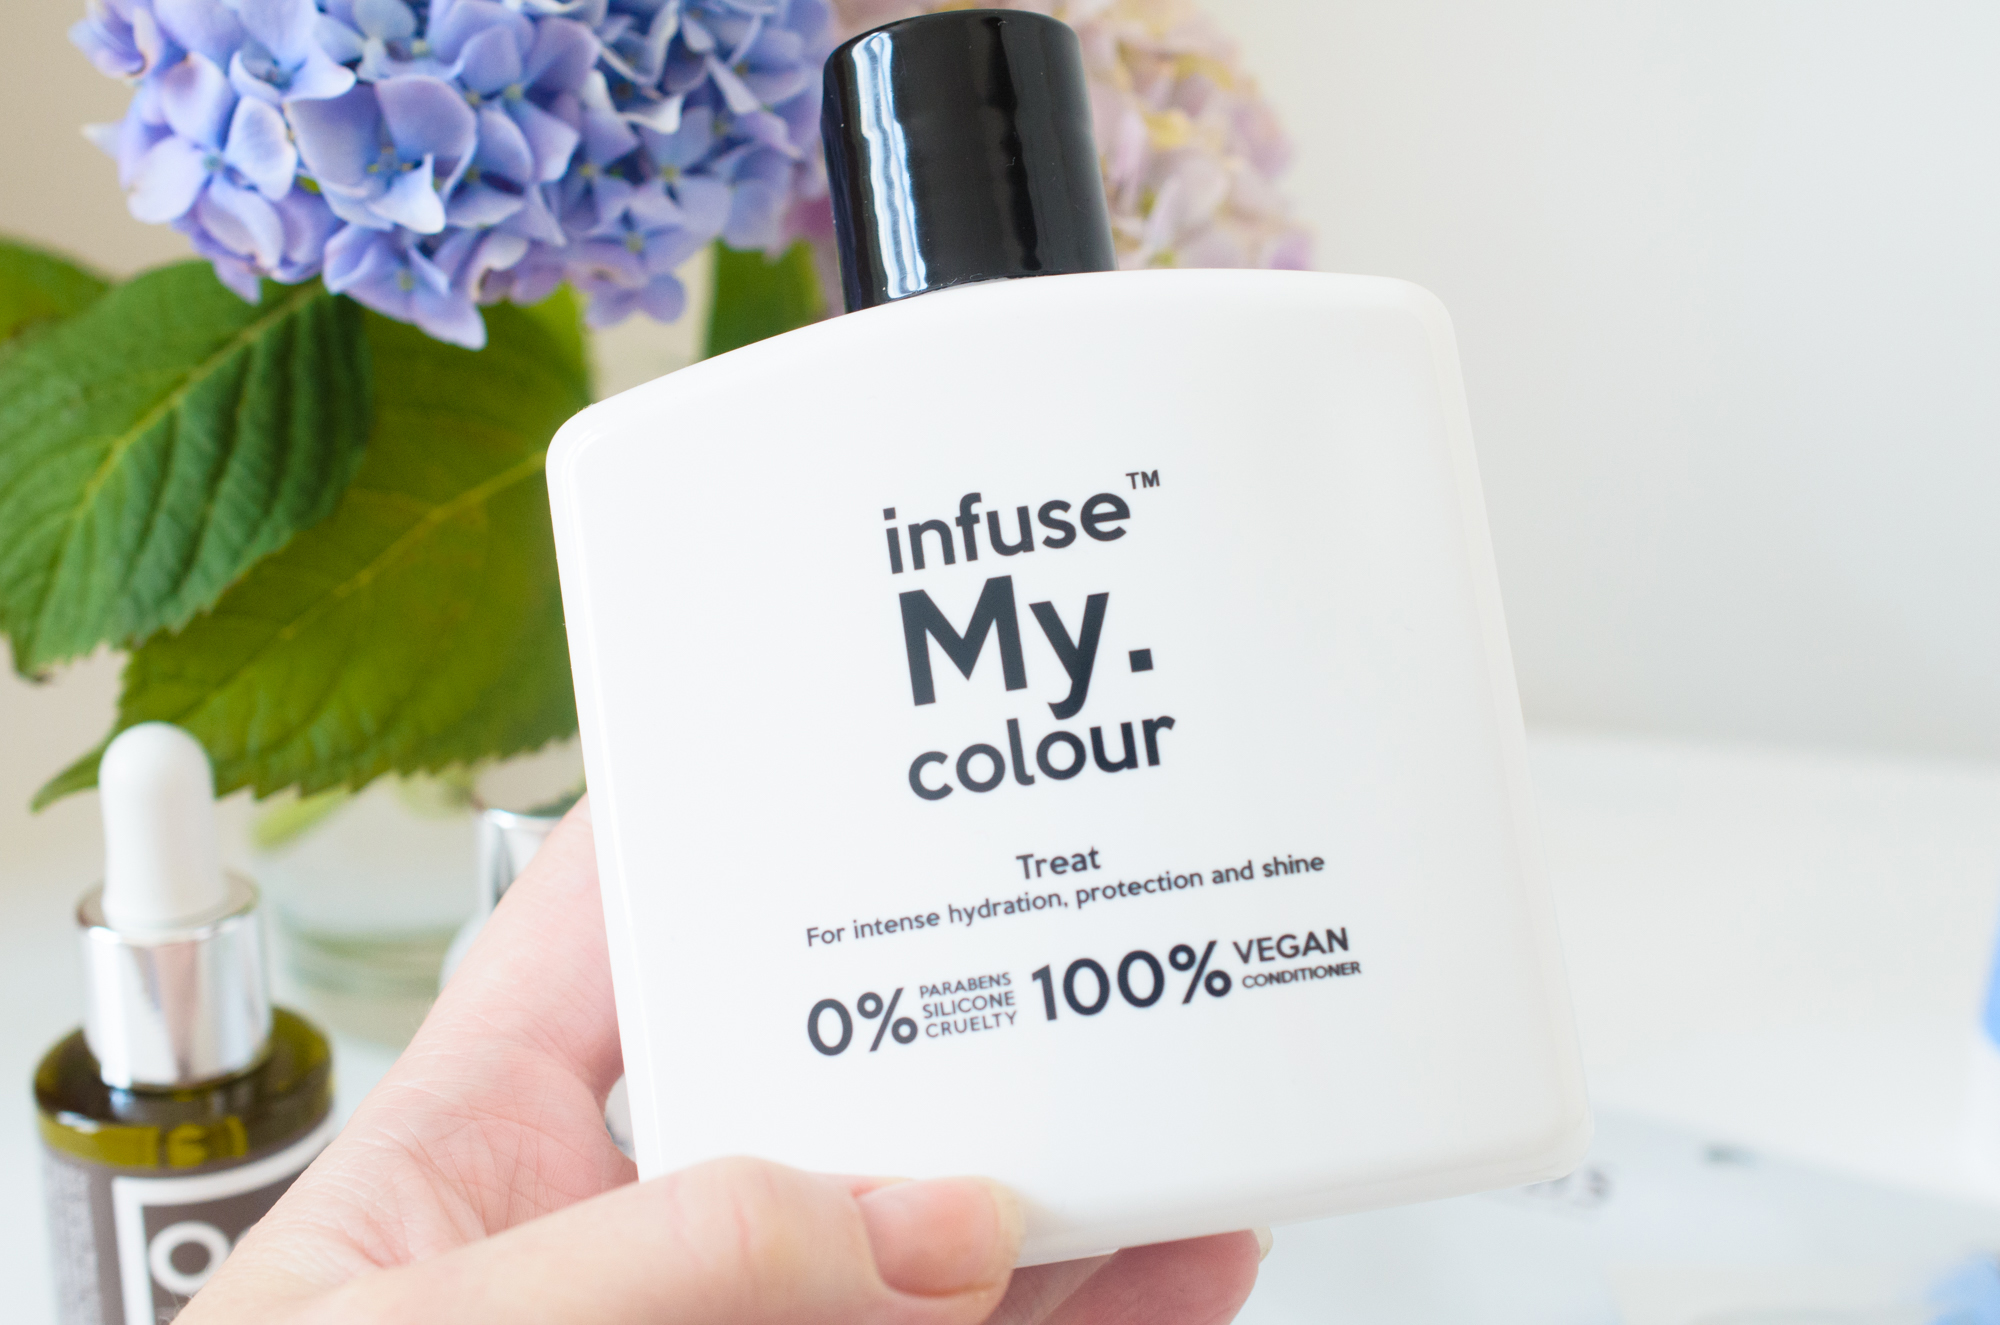 My. Haircare Infuse My. Colour Treat Conditioner